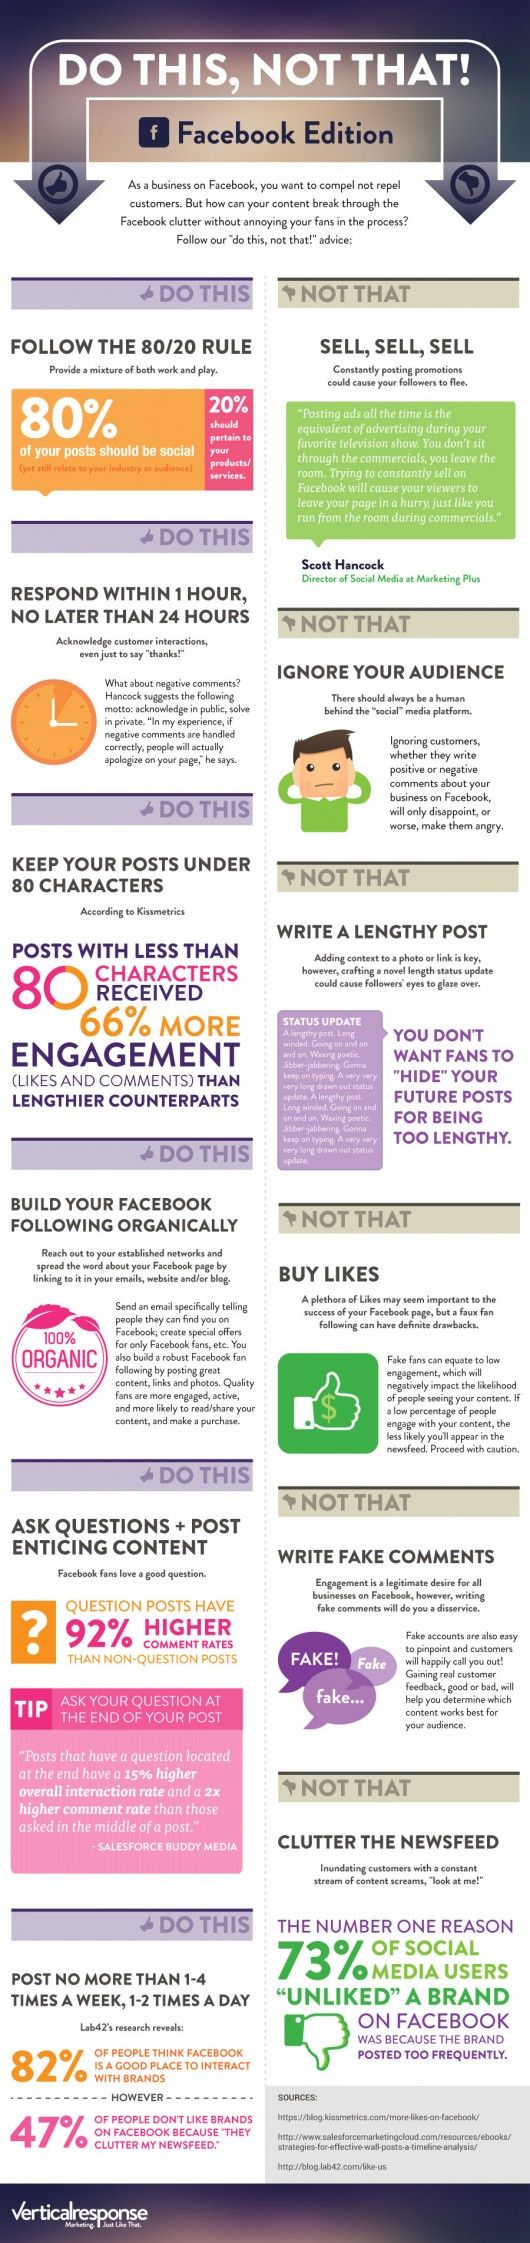 Facebook: Do's and Don'ts